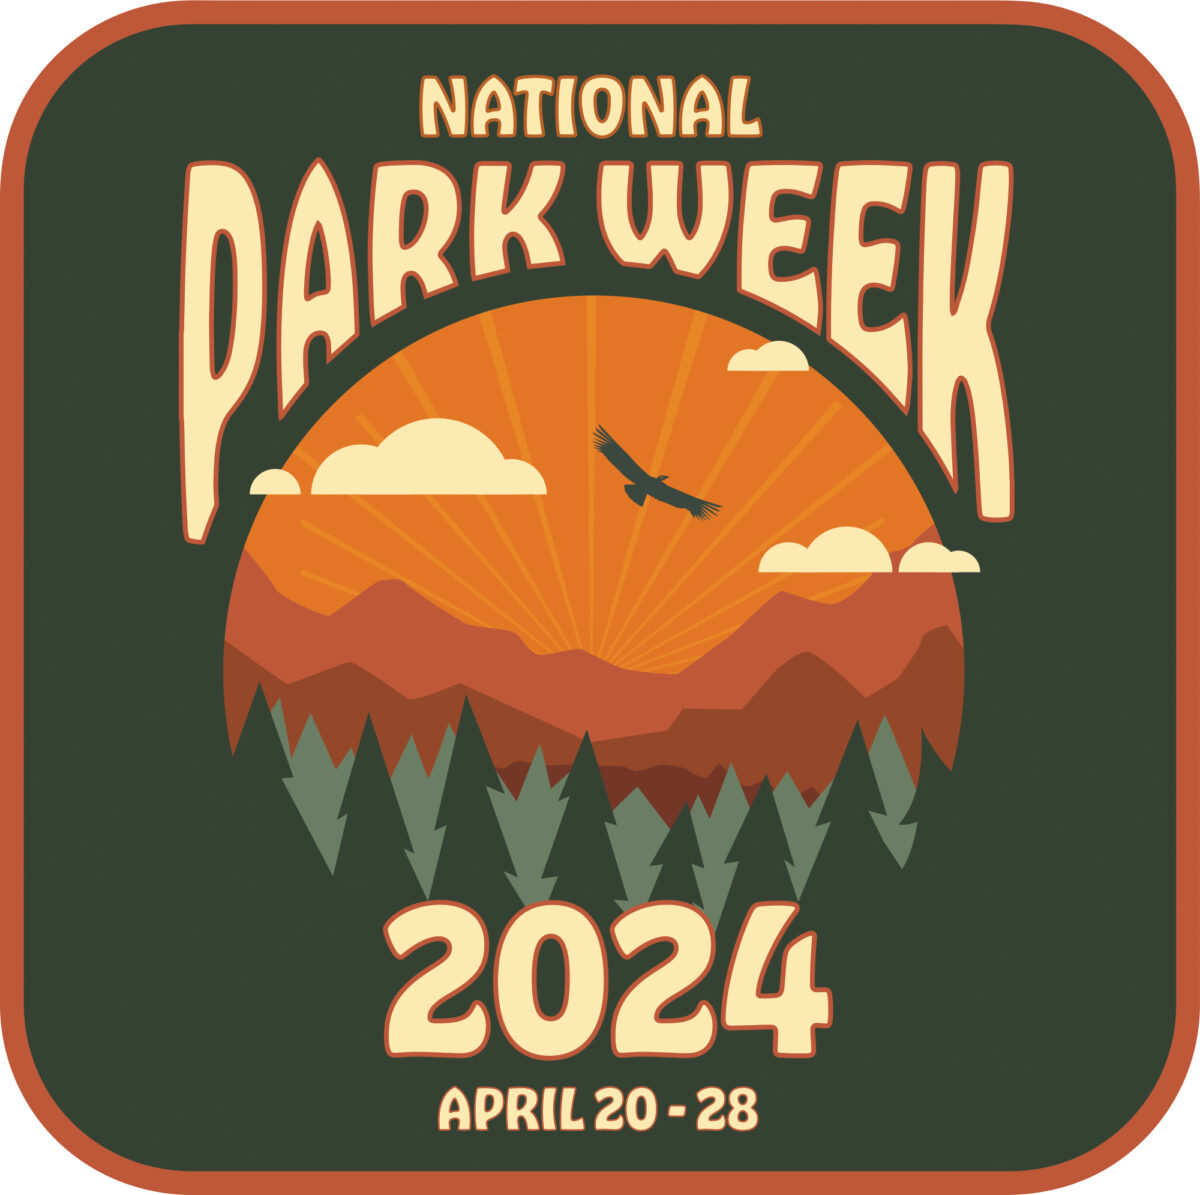 Image designed by the National Park Service